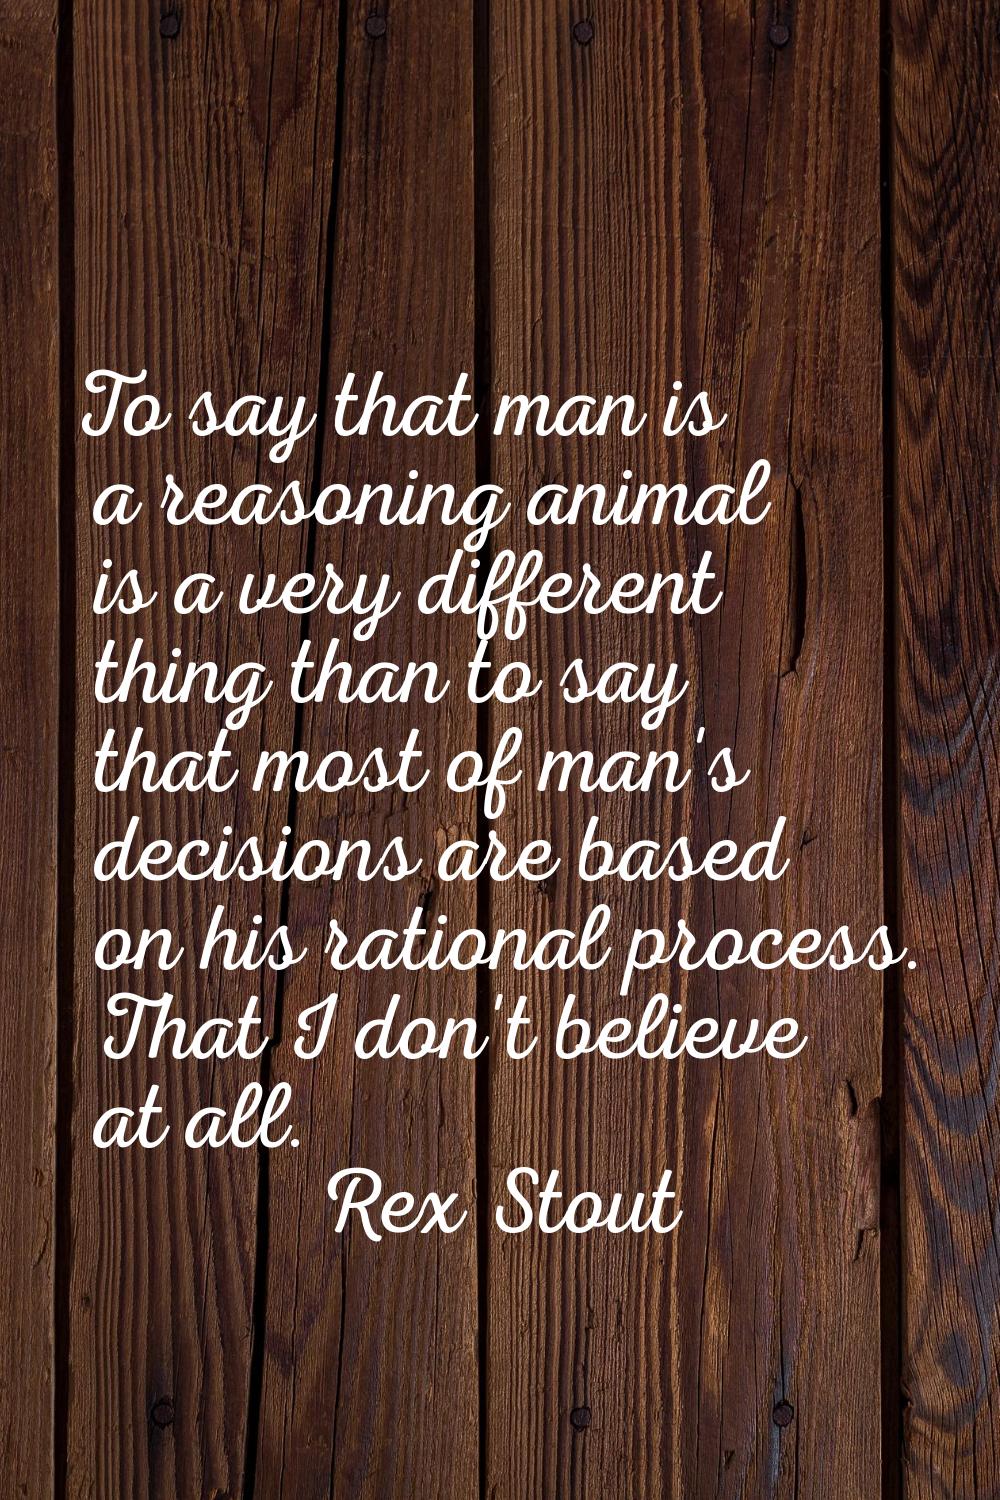 To say that man is a reasoning animal is a very different thing than to say that most of man's deci